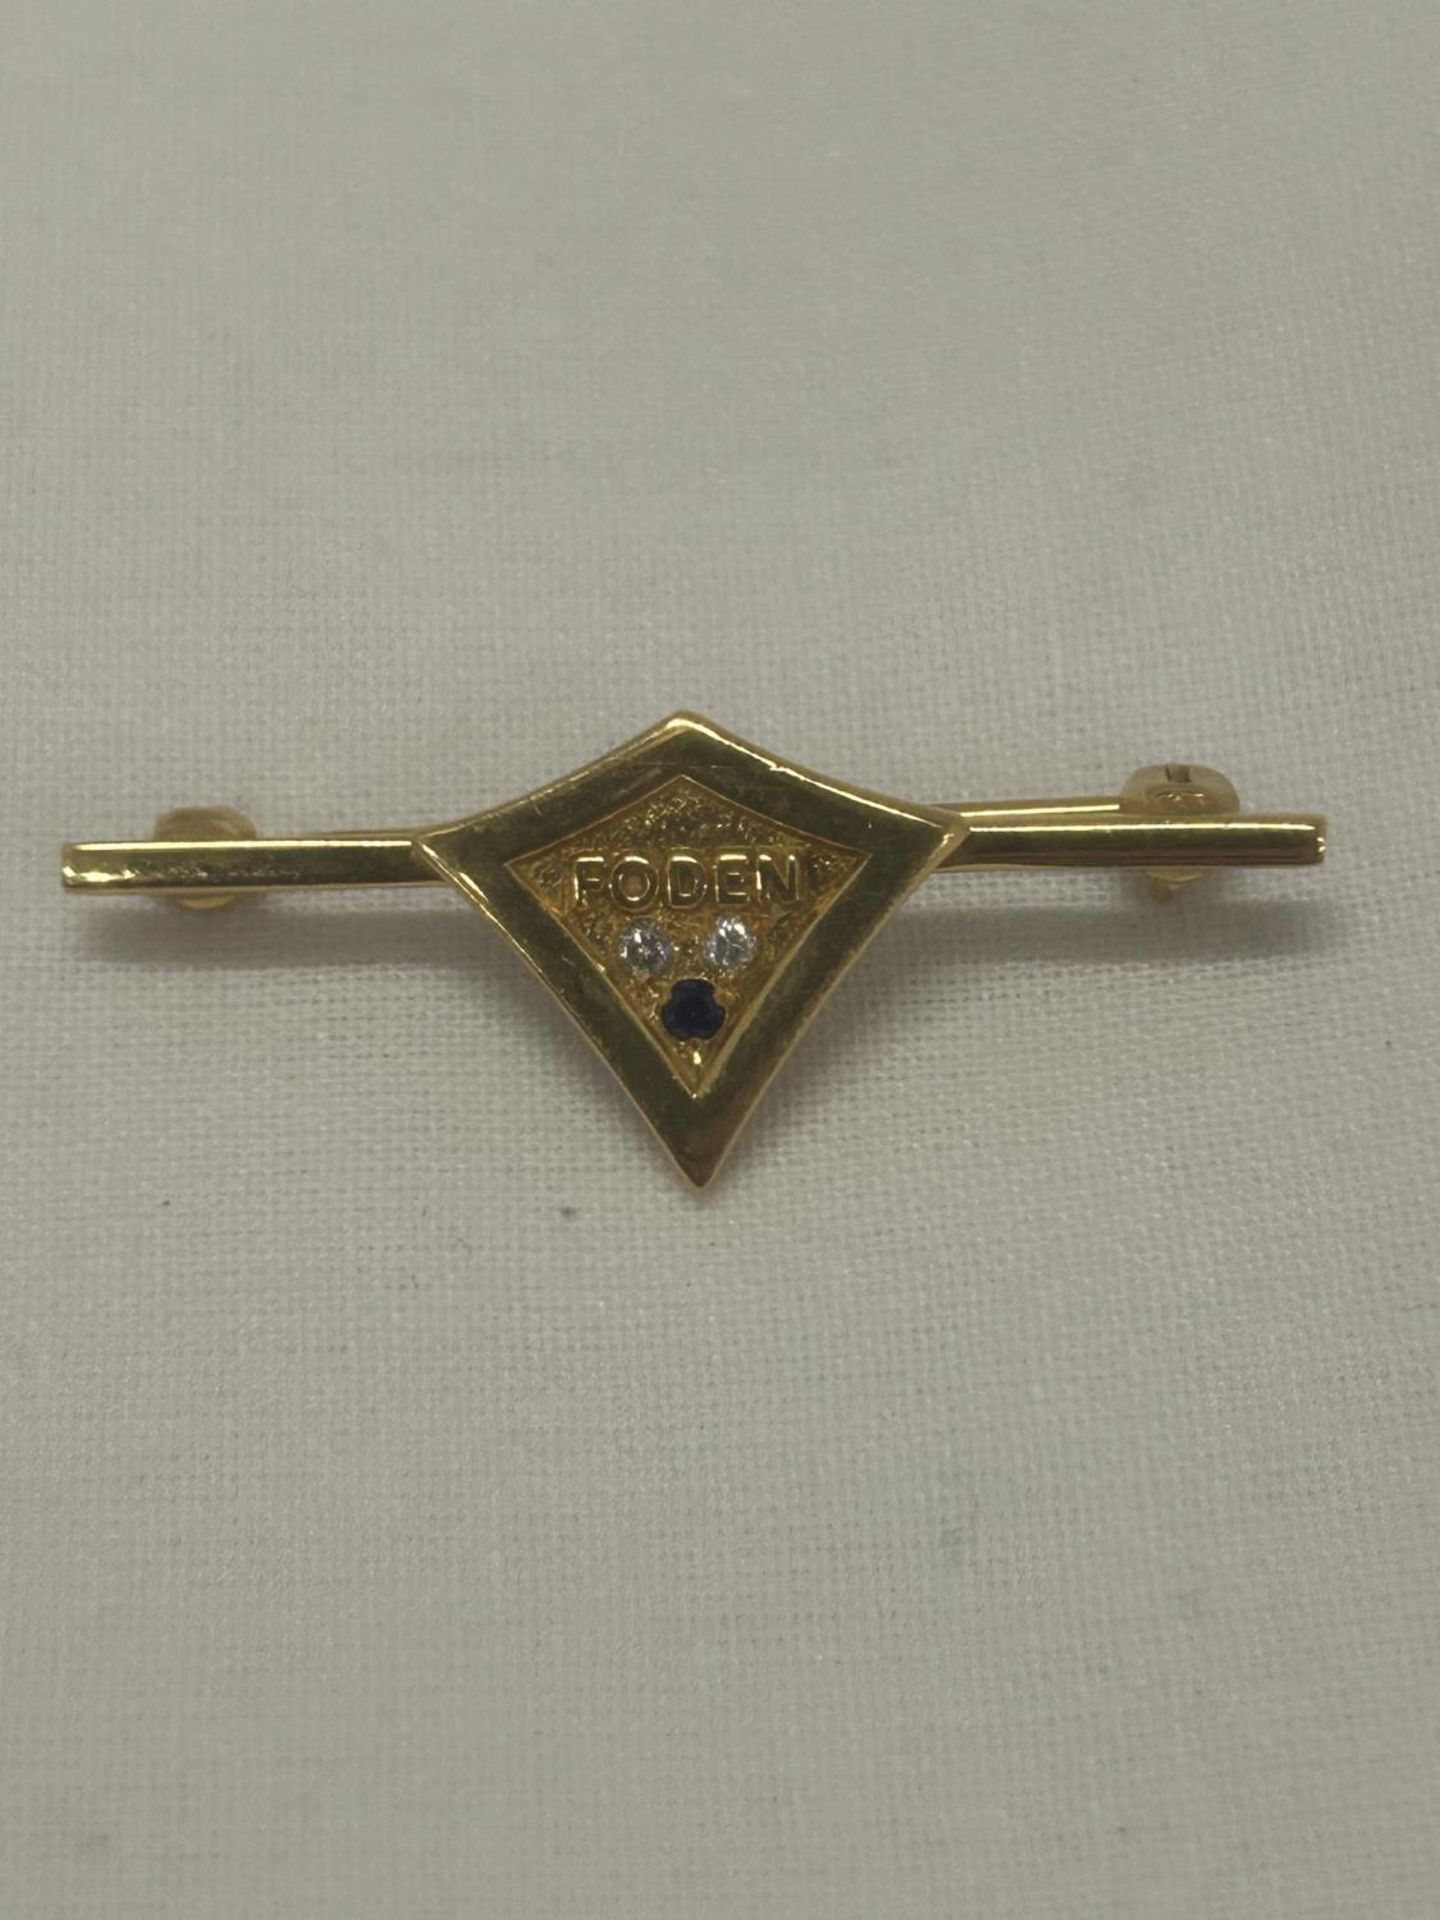 A HALLMARKED 9CT GOLD DIAMOND AND SAPPHIRE 'FODEN' BADGE WEIGHT 3.37G